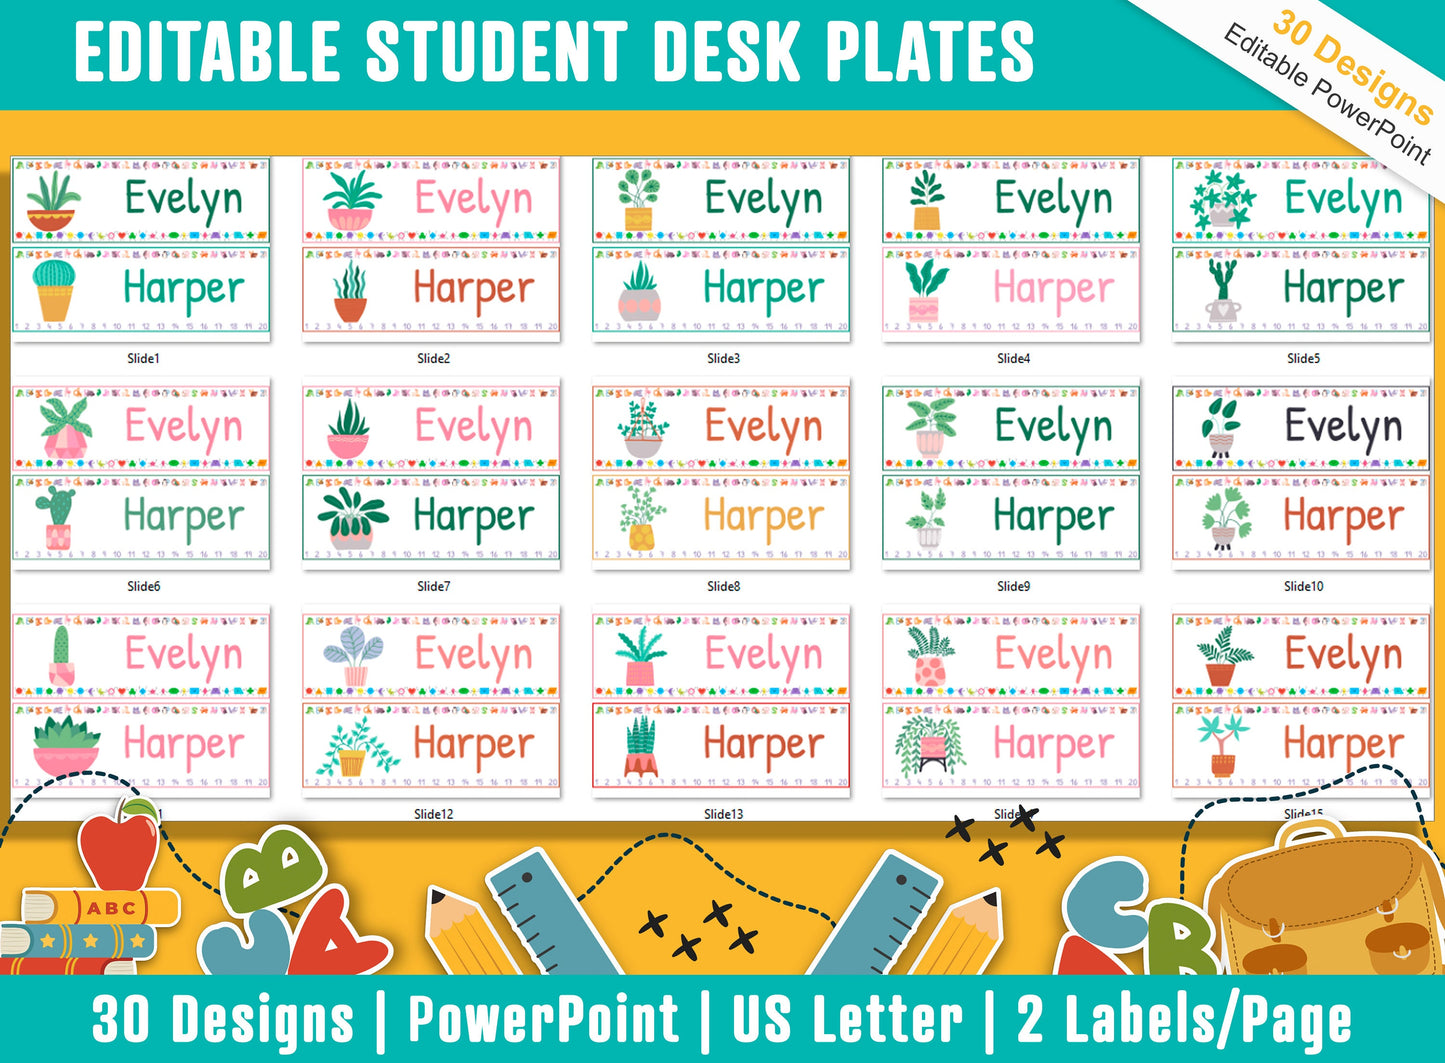 Tropical House Plant Student Desk Plates: 30 Editable Designs with PowerPoint, US Letter Size, Instant Download